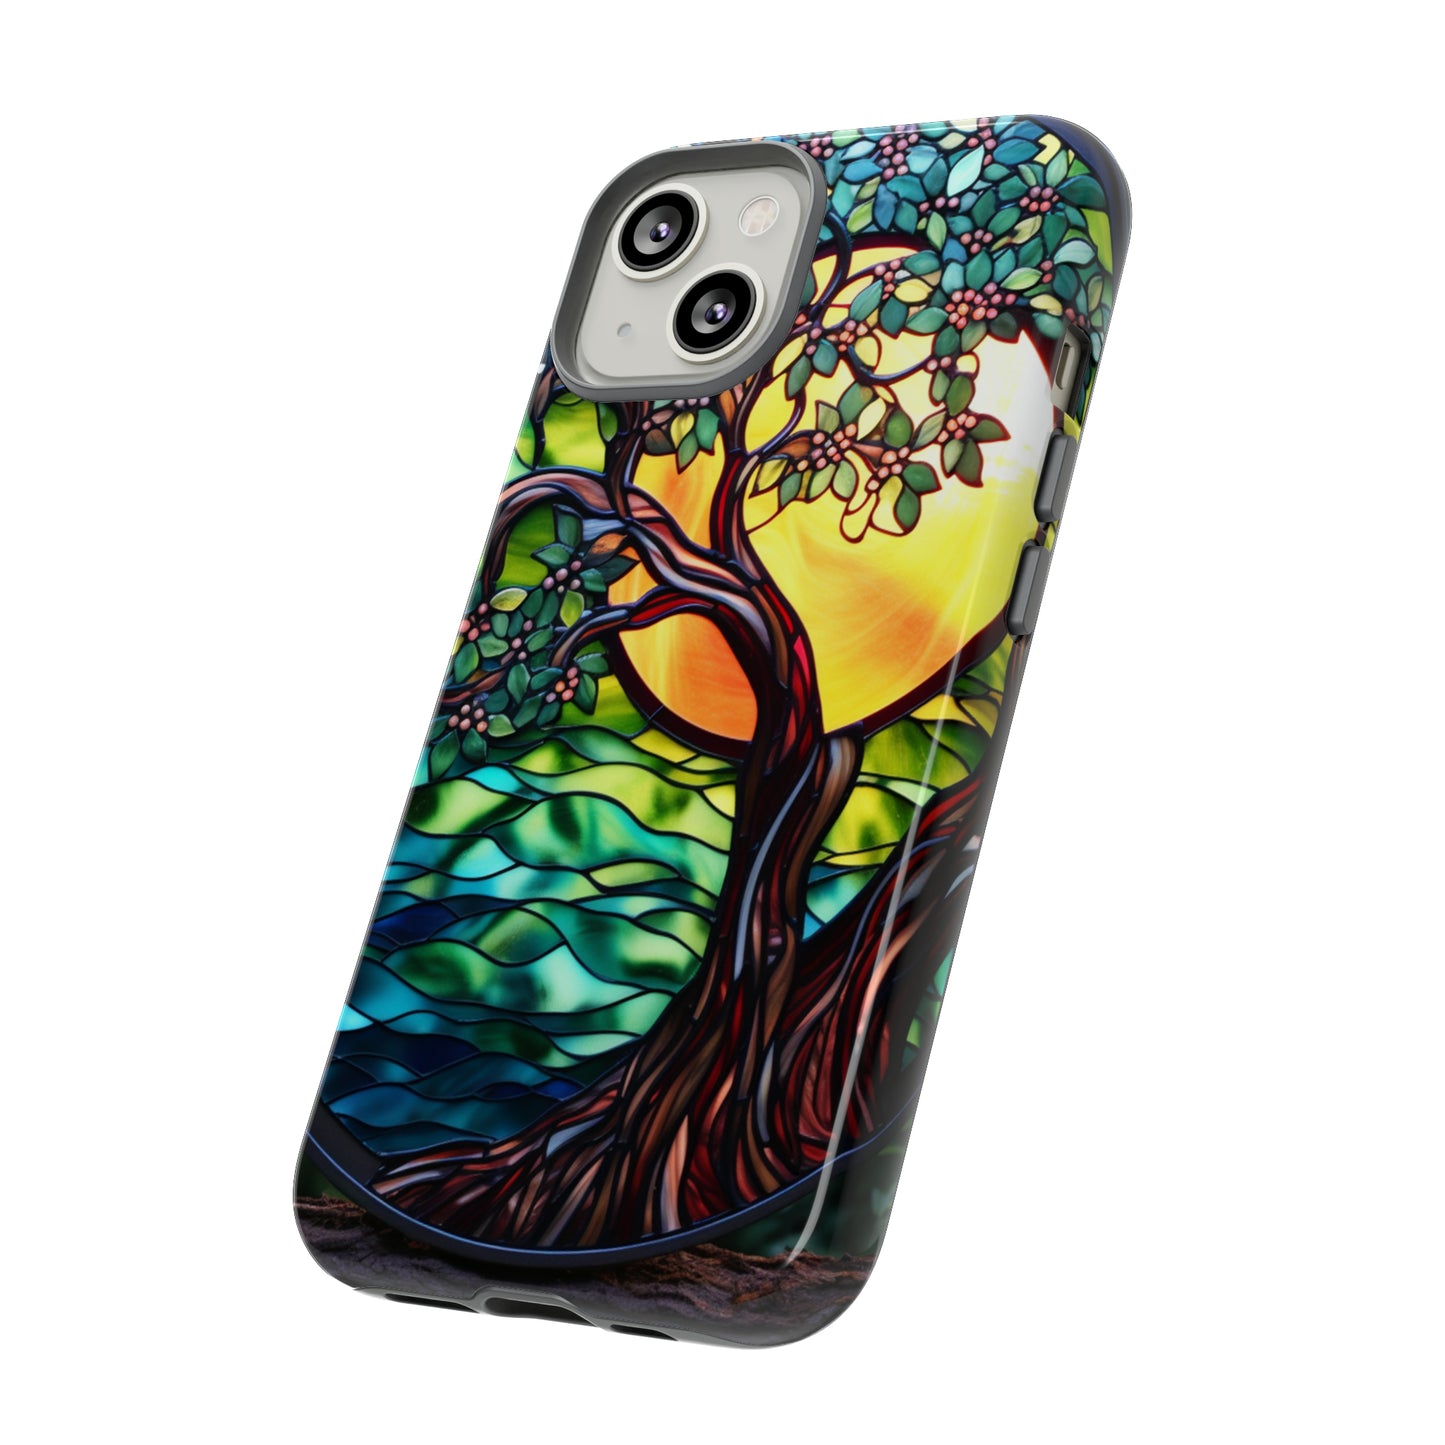 Stained Glass Mosaic Tile Tree of Life Full Moon